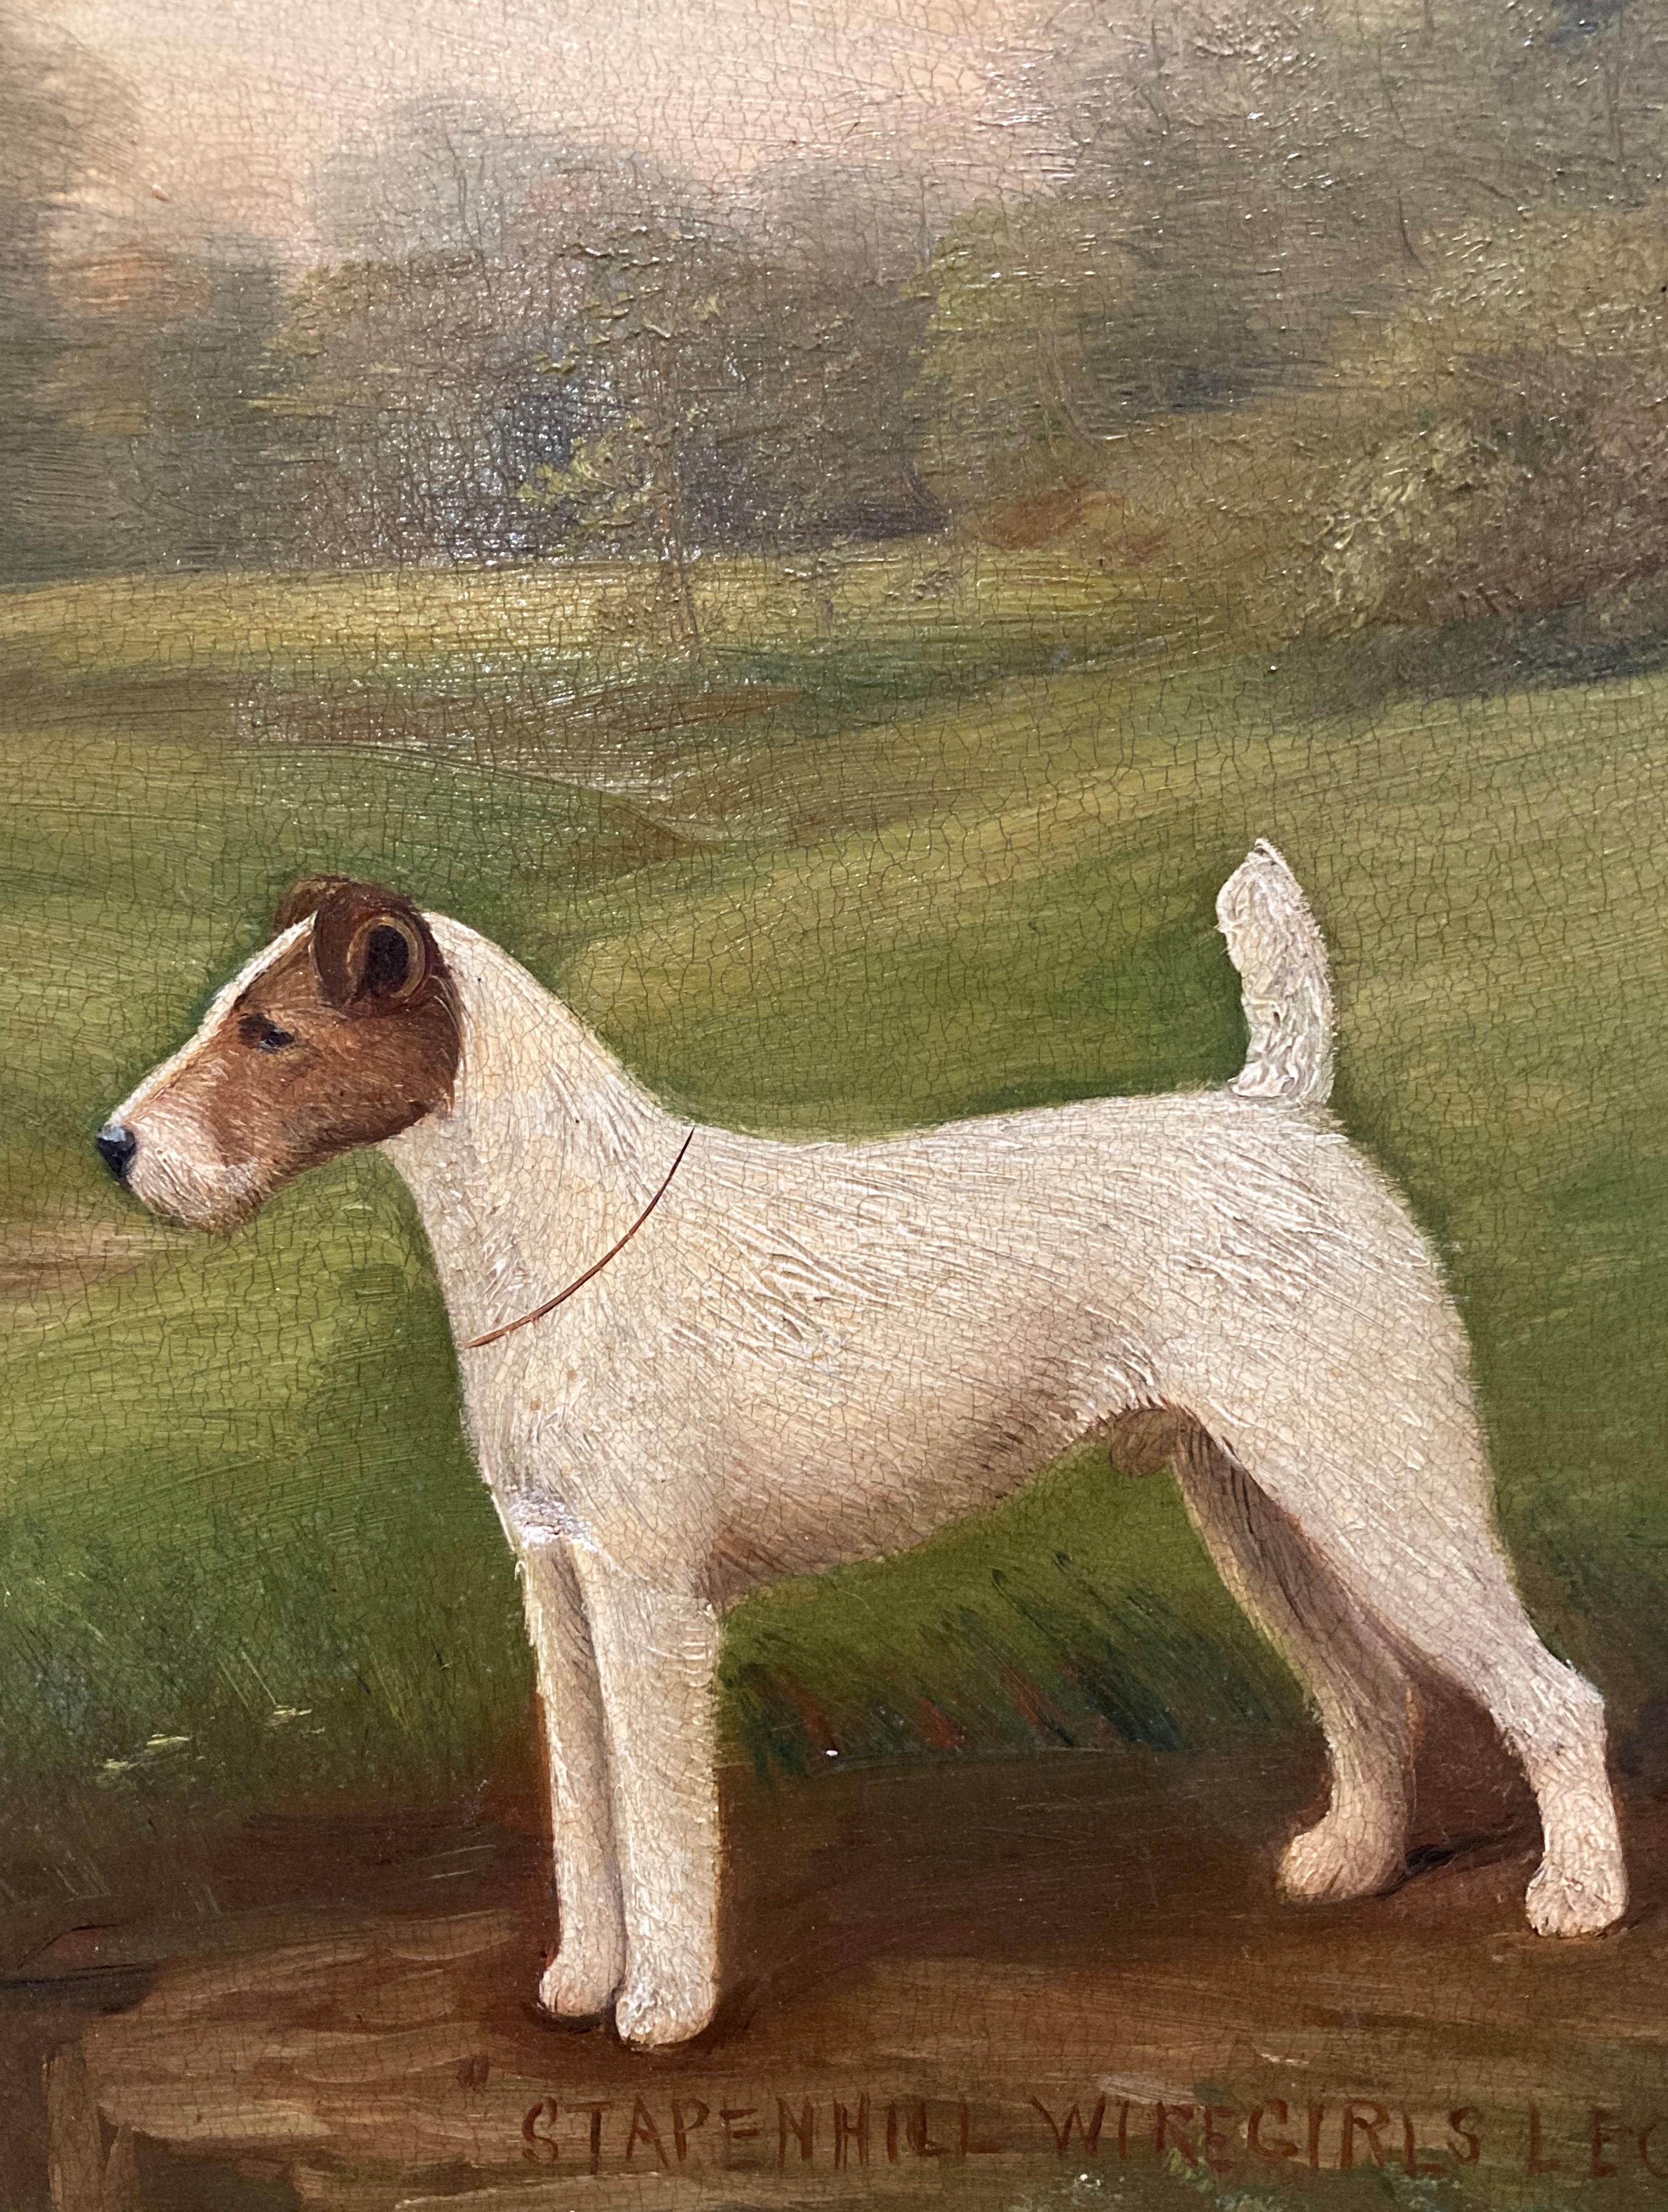 H Crowther 1923, 'Stapenhill Wiregirls Legacy', study of a fox terrier, oil on canvas, - Image 5 of 32